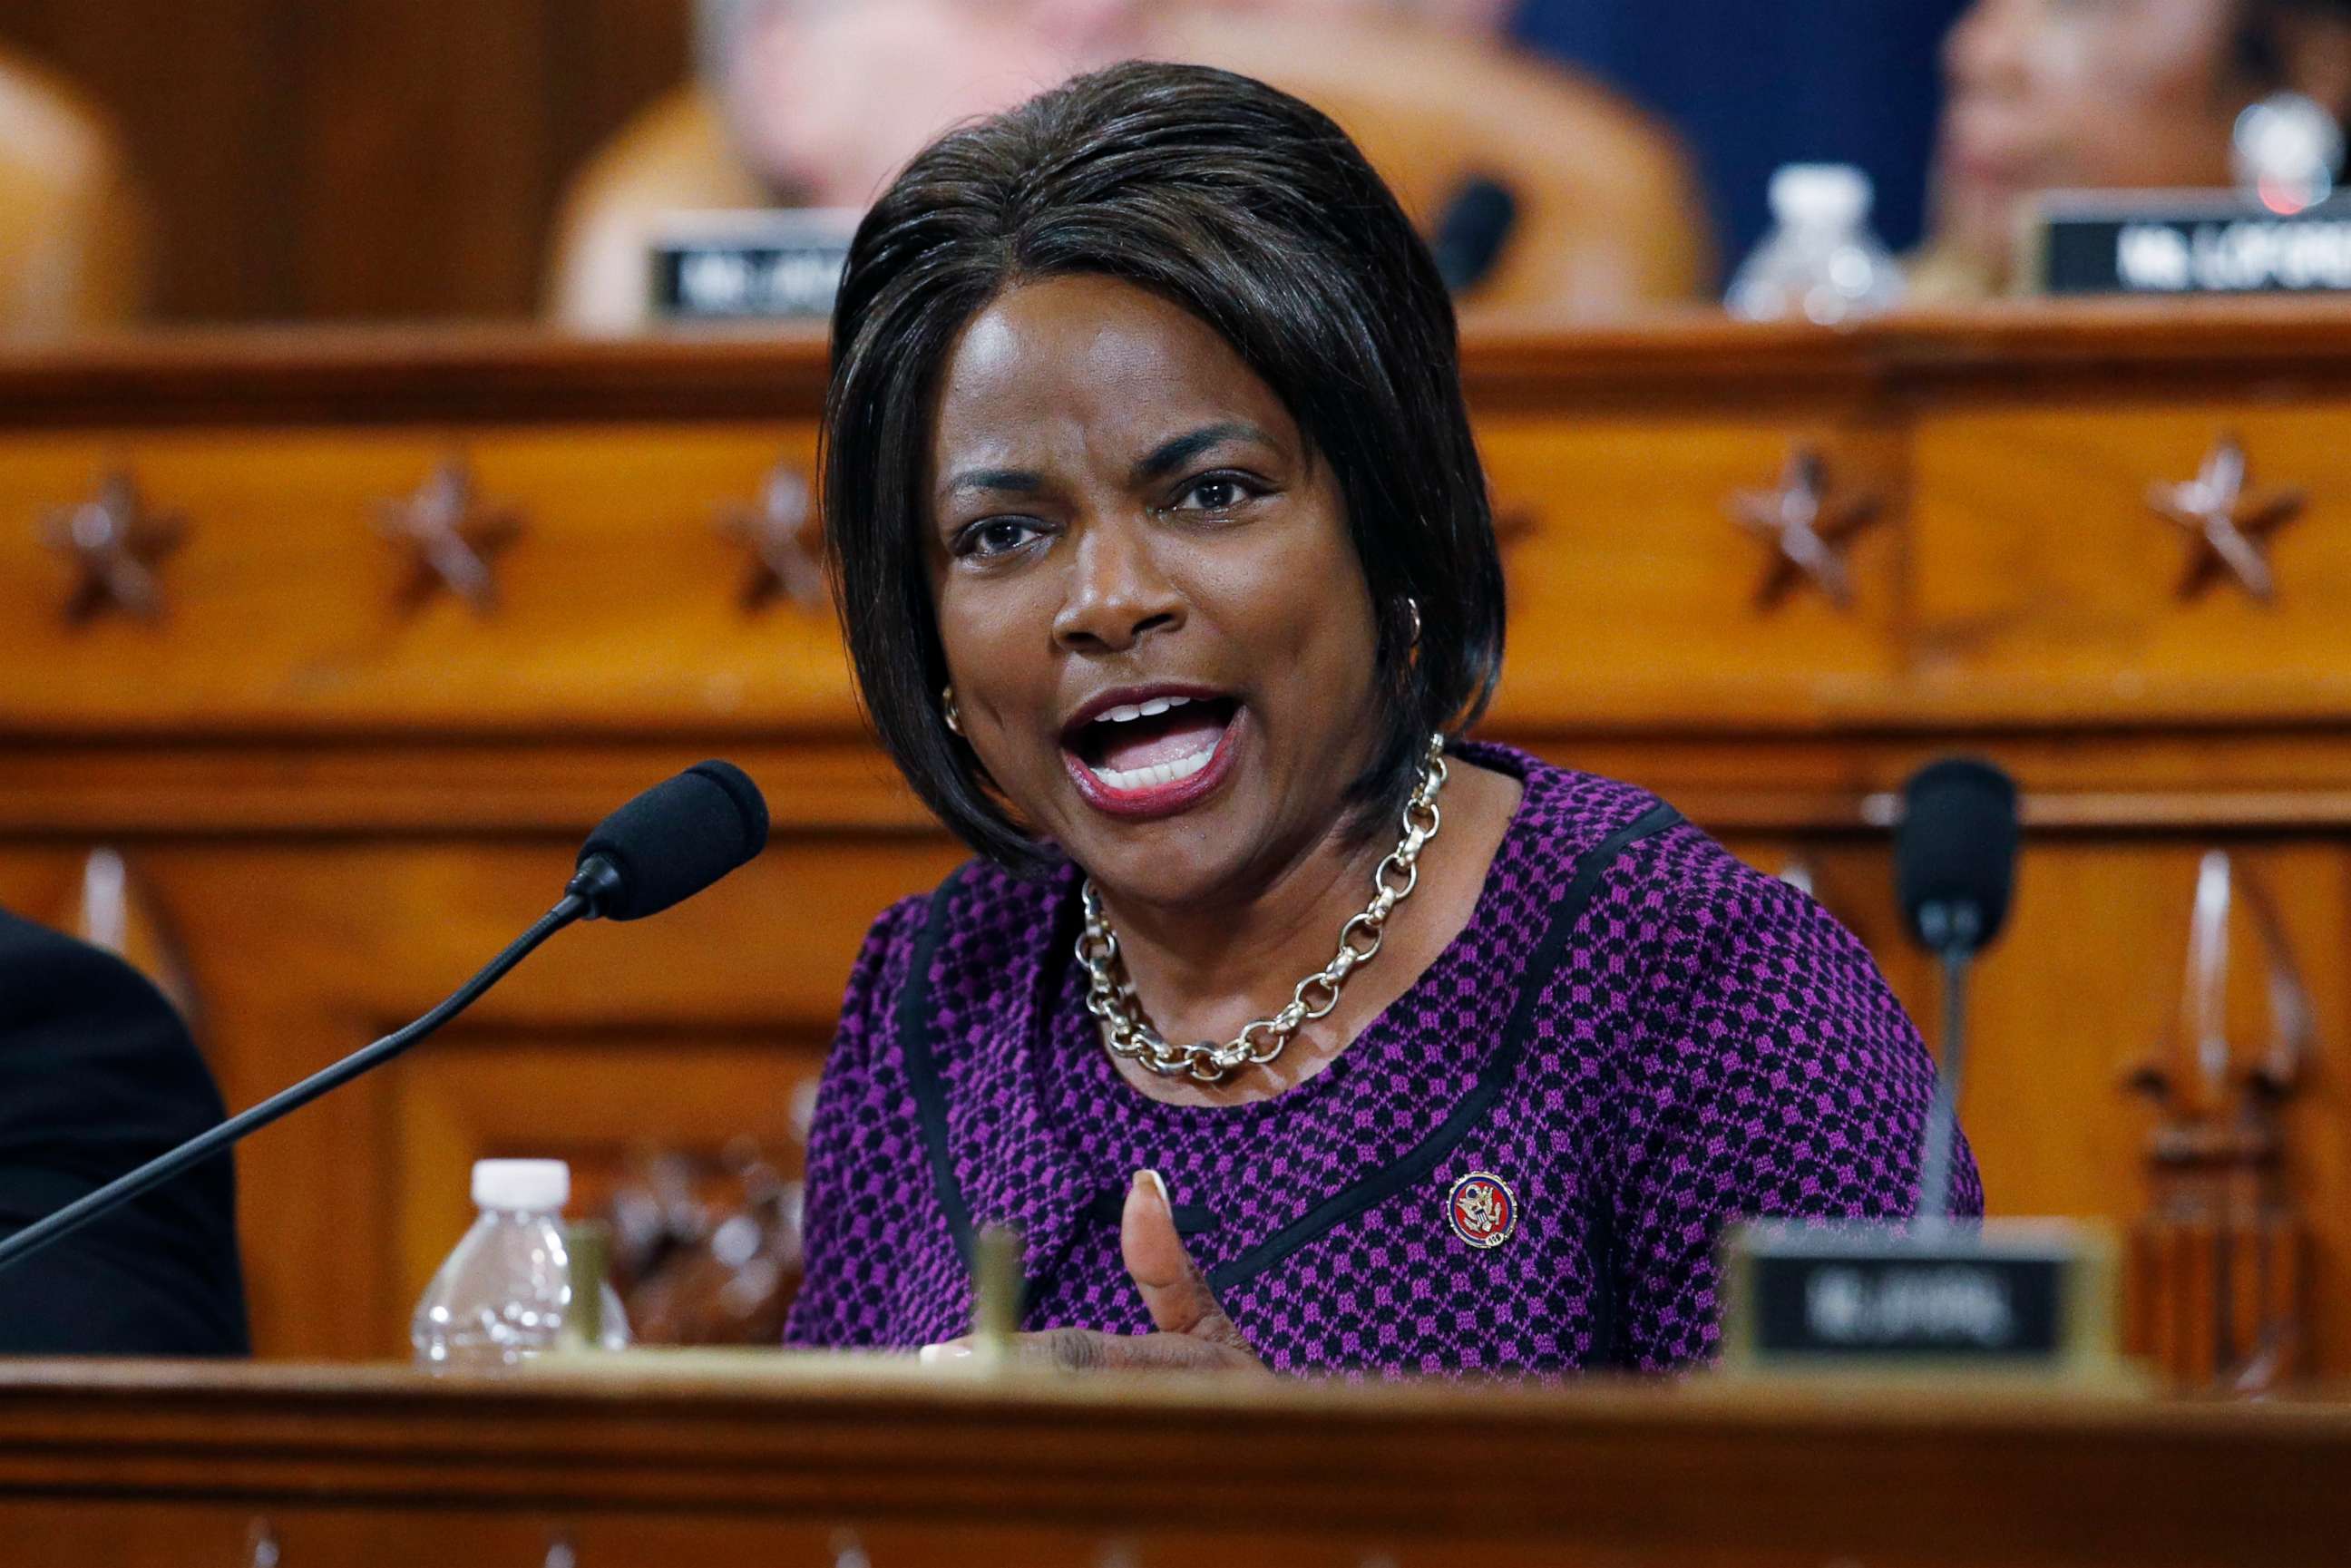 PHOTO: Rep. Val Demings gives her opening statement during a House Judiciary Committee markup of the articles of impeachment against President Donald Trump on Capitol Hill in Washington.